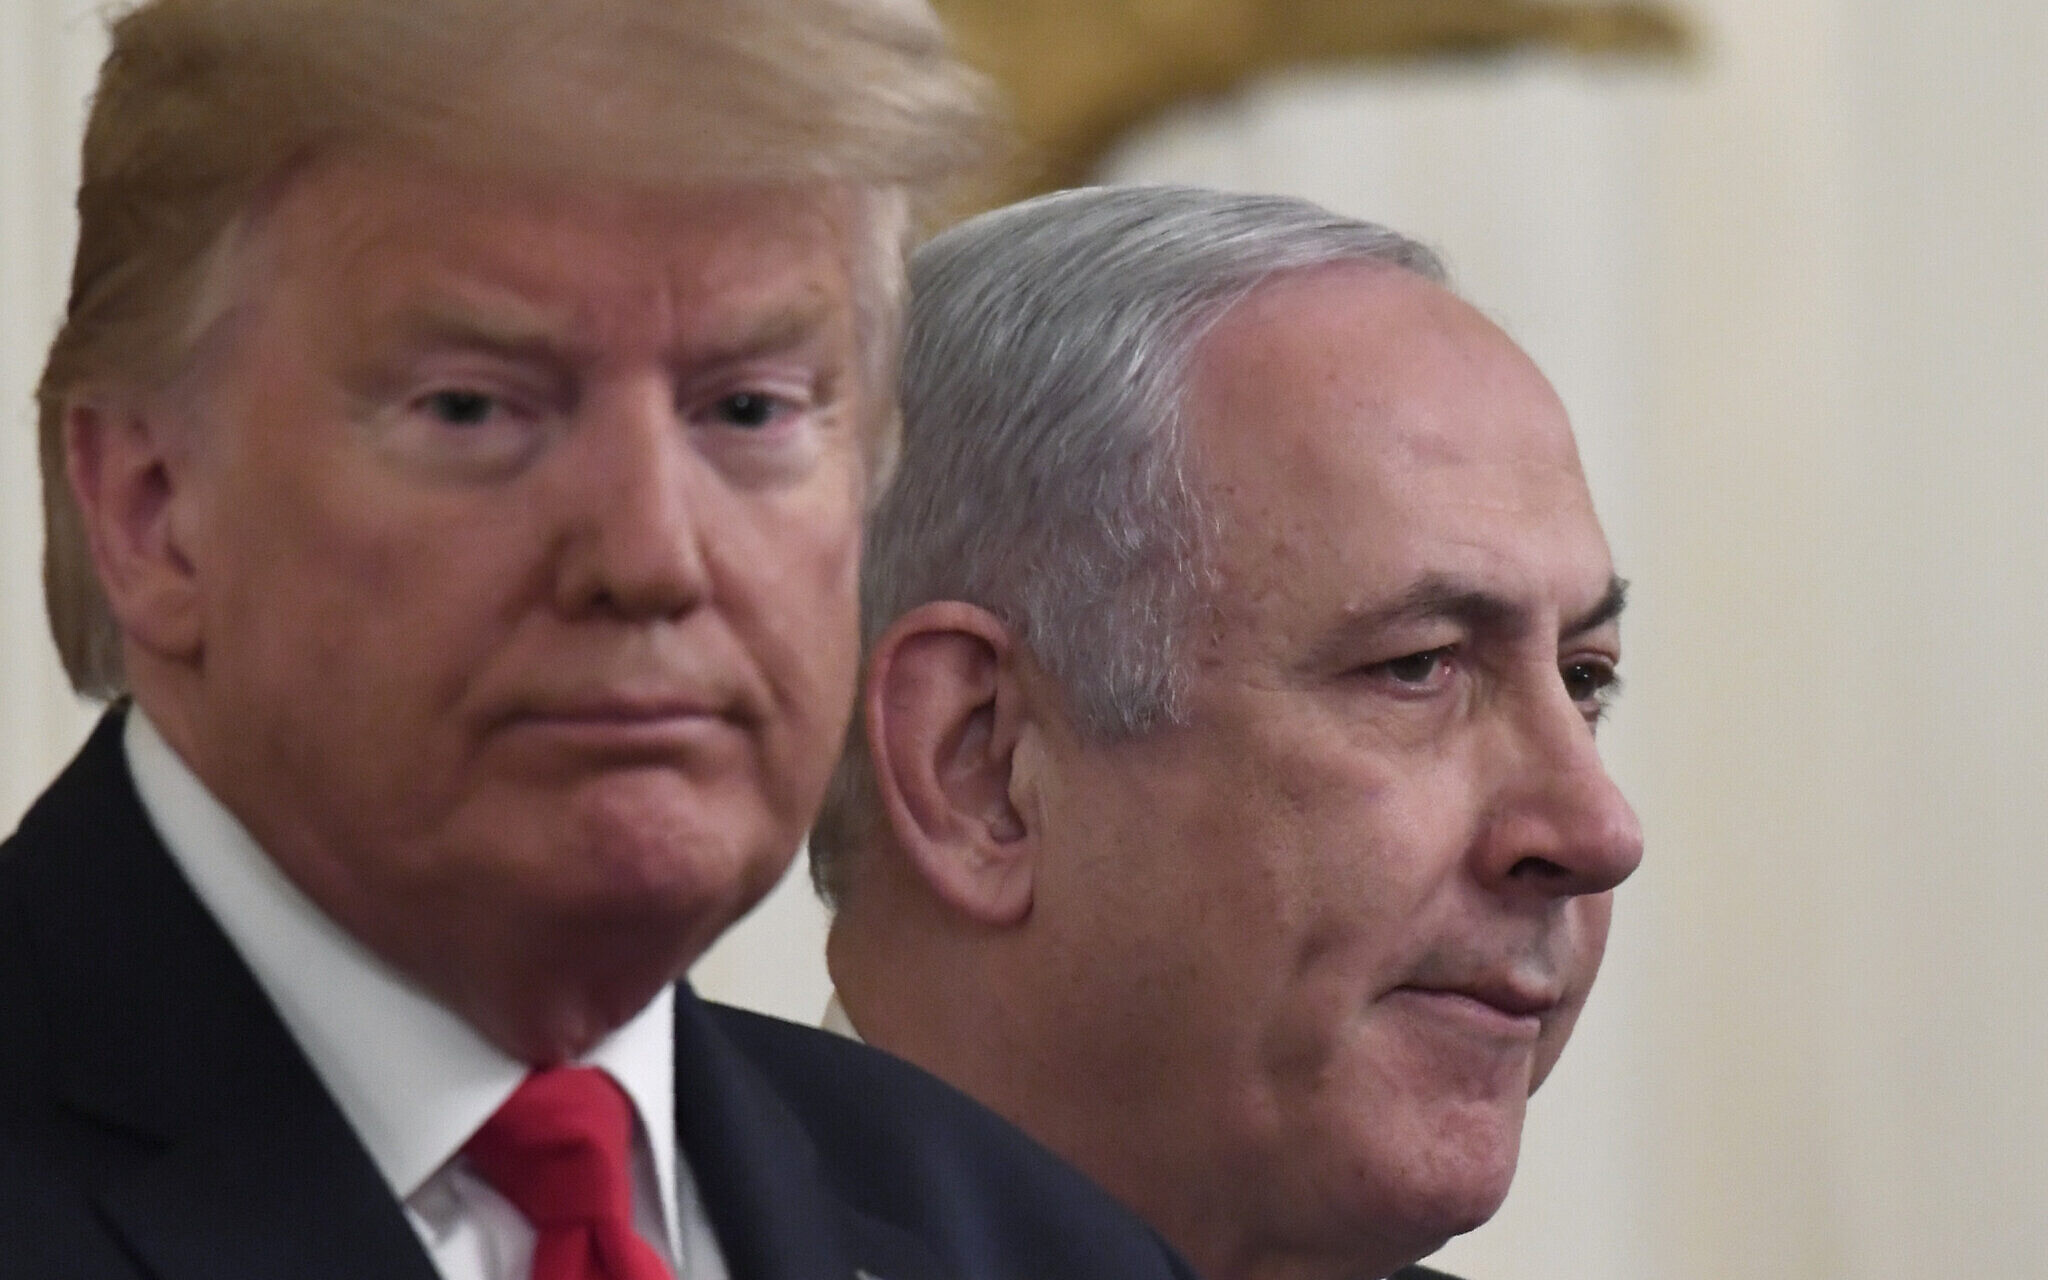 President Trump: “I Don’t Think Bibi Ever Wanted To Make A Deal.”